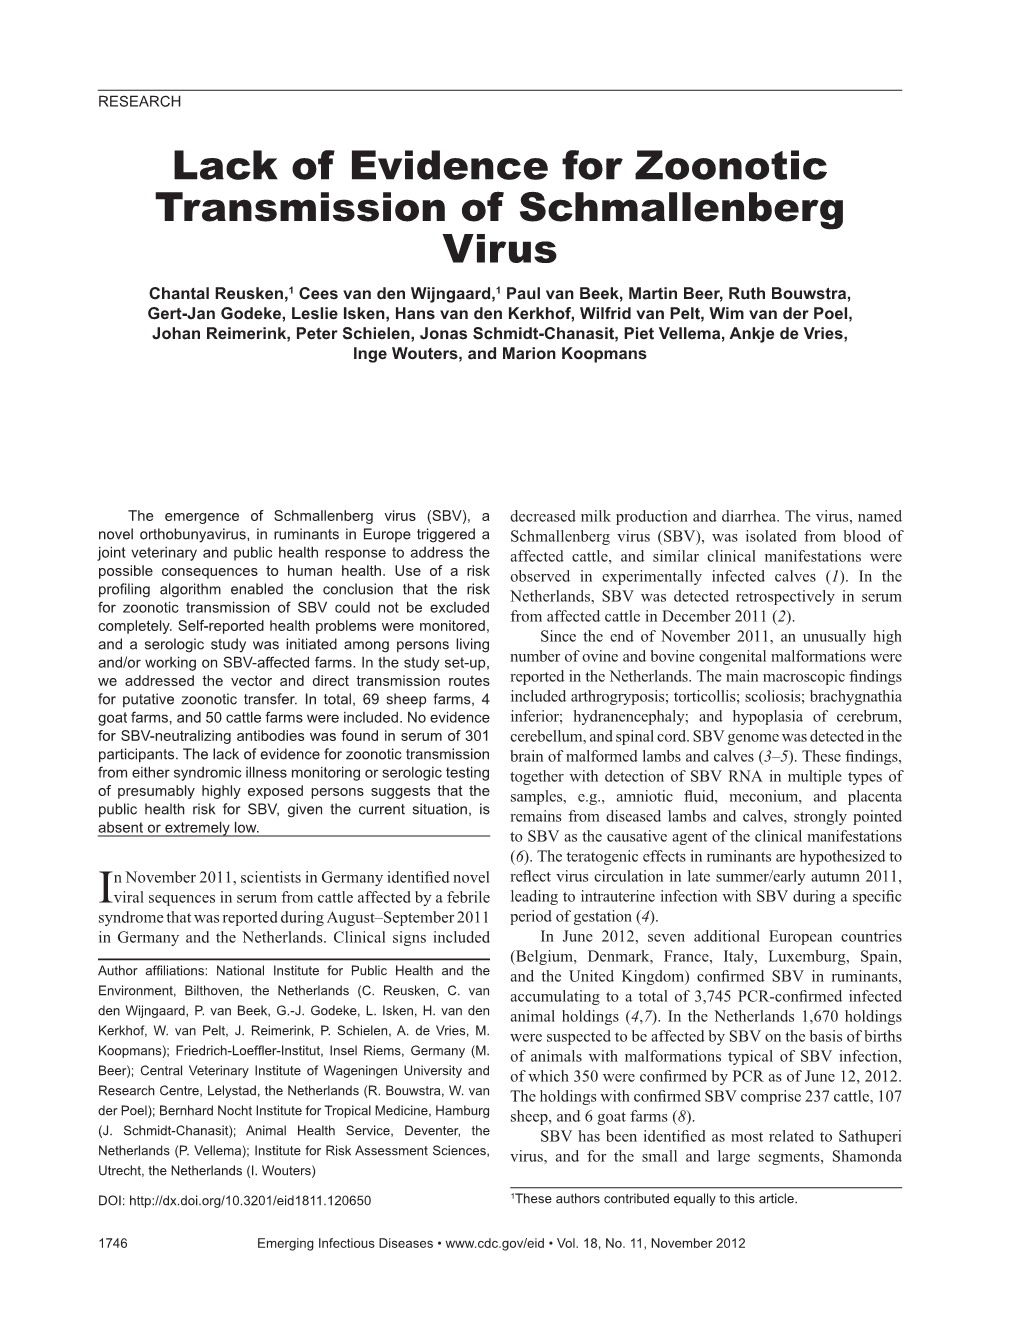 Lack of Evidence for Zoonotic Transmission of Schmallenberg Virus